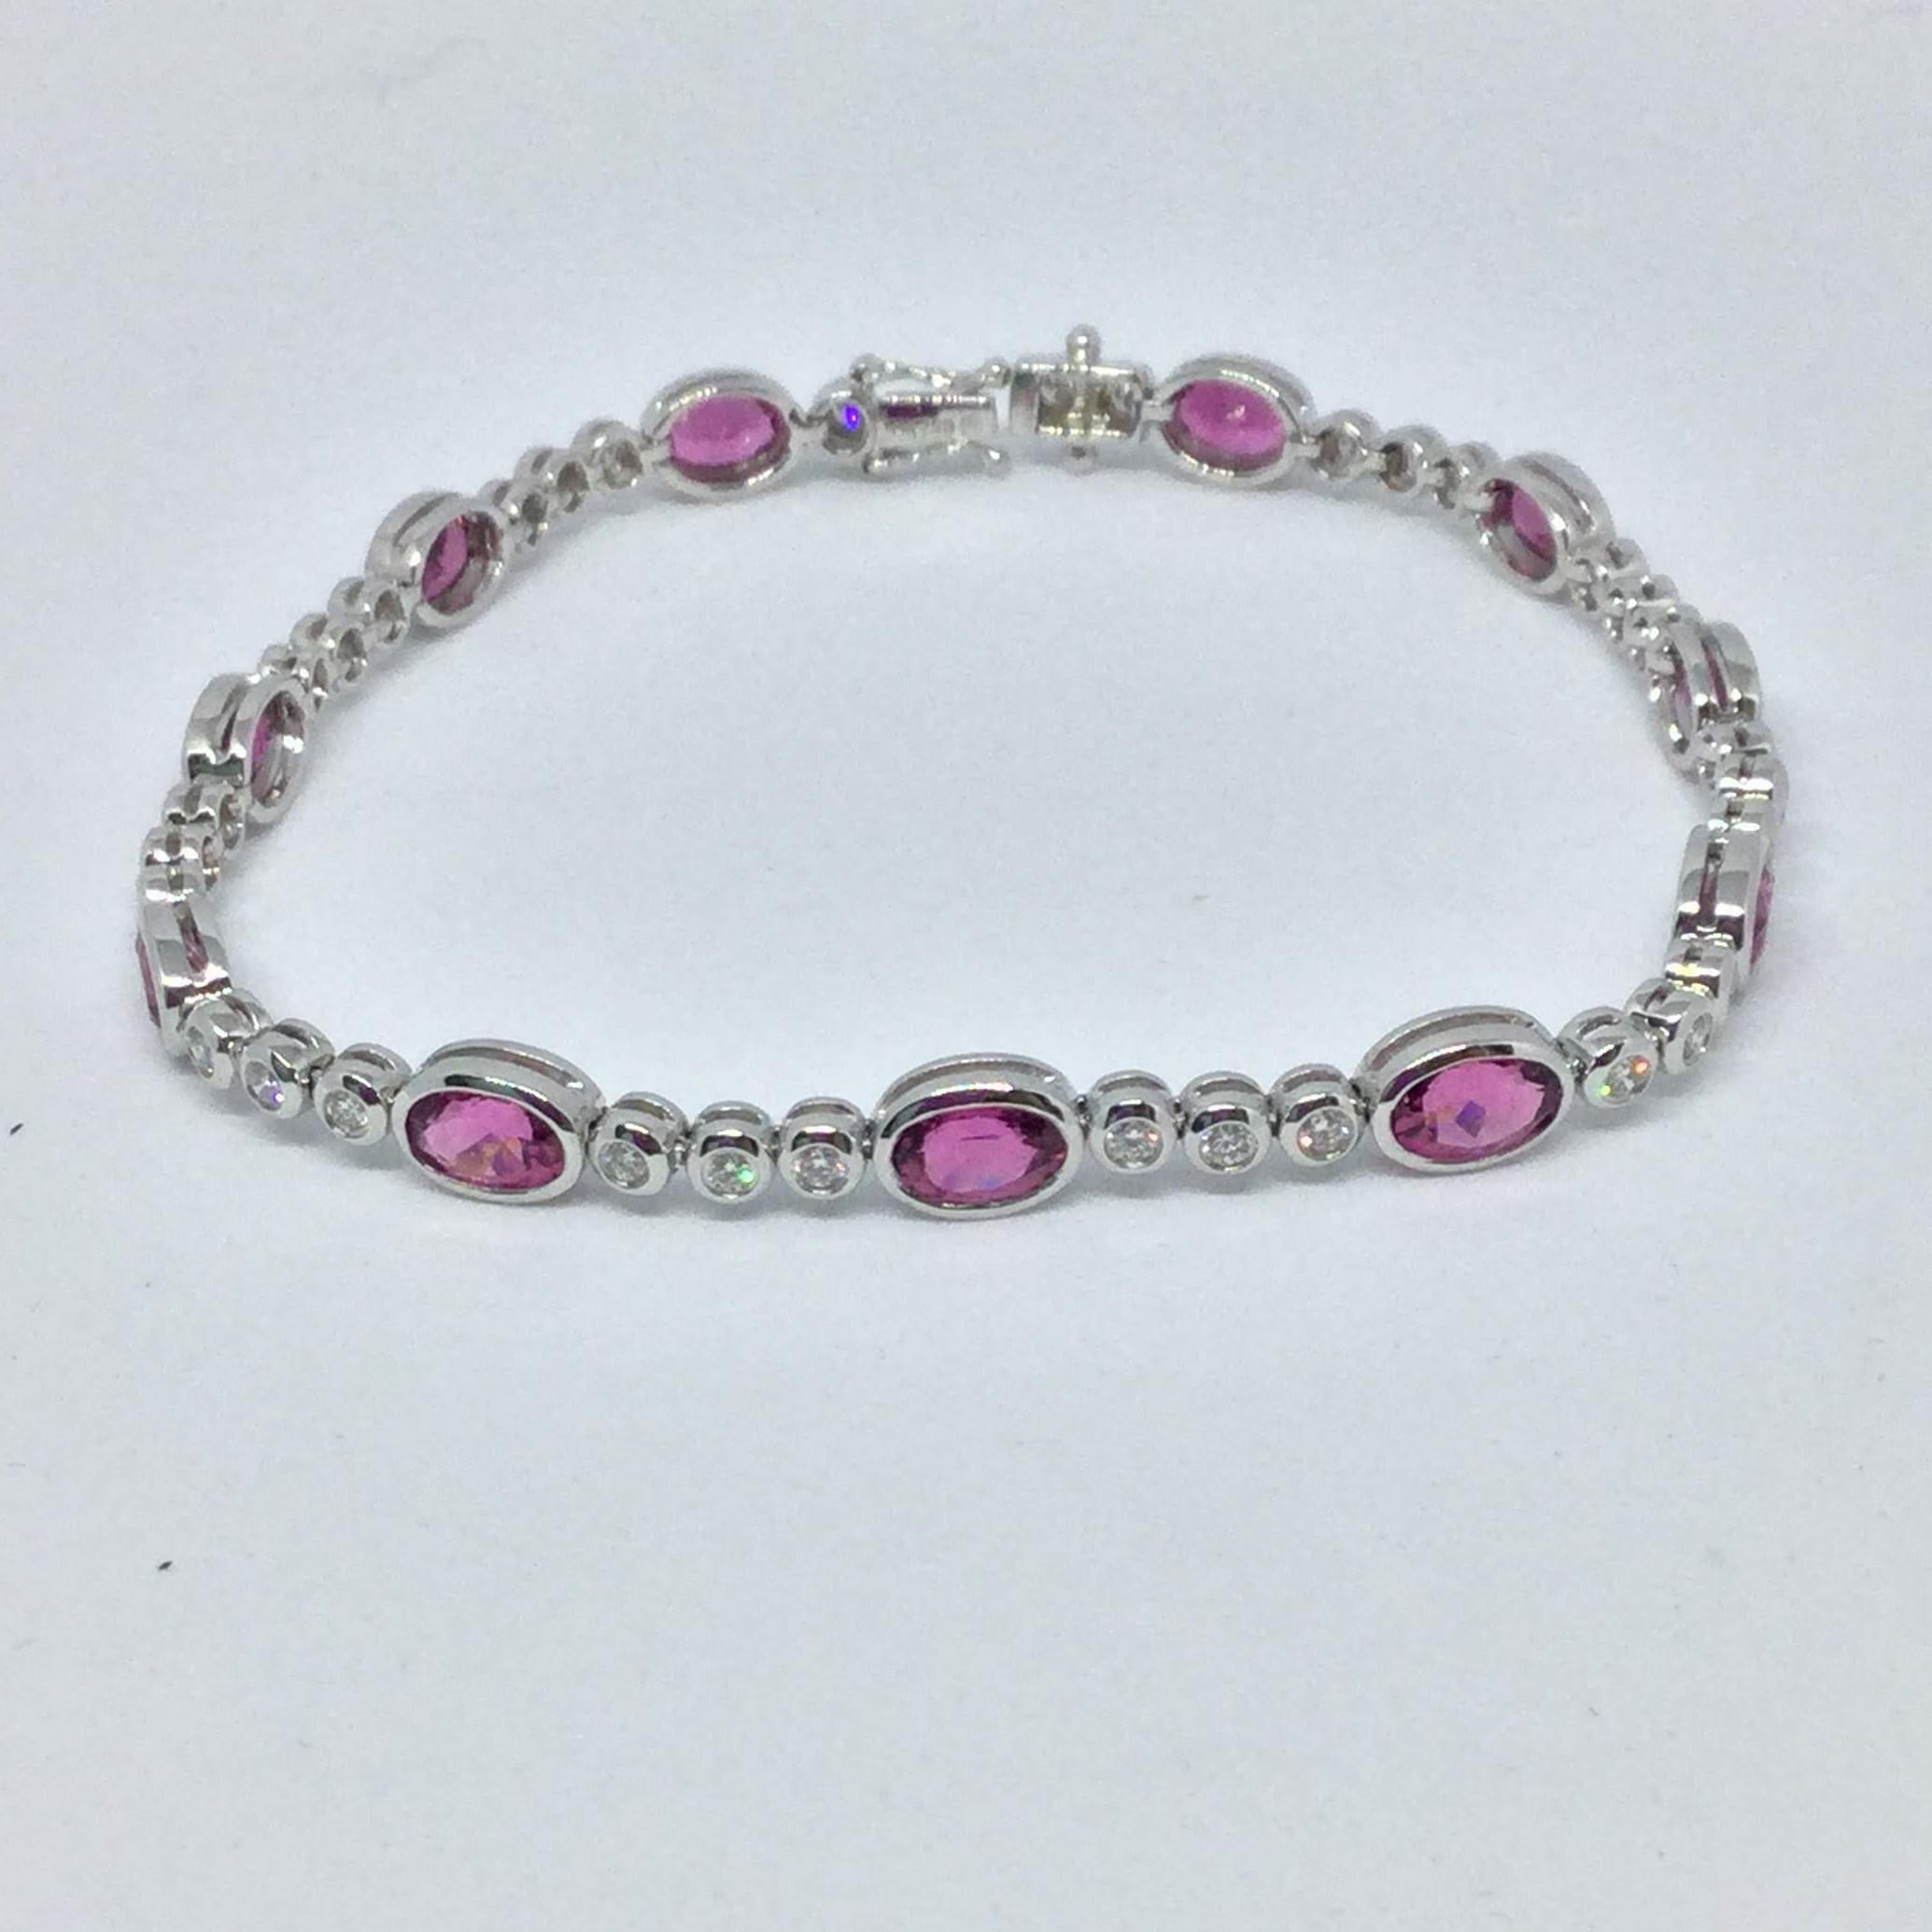 18K white gold pink tourmaline and diamond bracelet. Bracelet contains 11 oval cut pink tourmaline weighing 5.05 ctw and medium to dark pink in color. The bracelet contains 33 round brilliant cut diamonds weighing 0.72 ctw. The bracelet in 7 inches